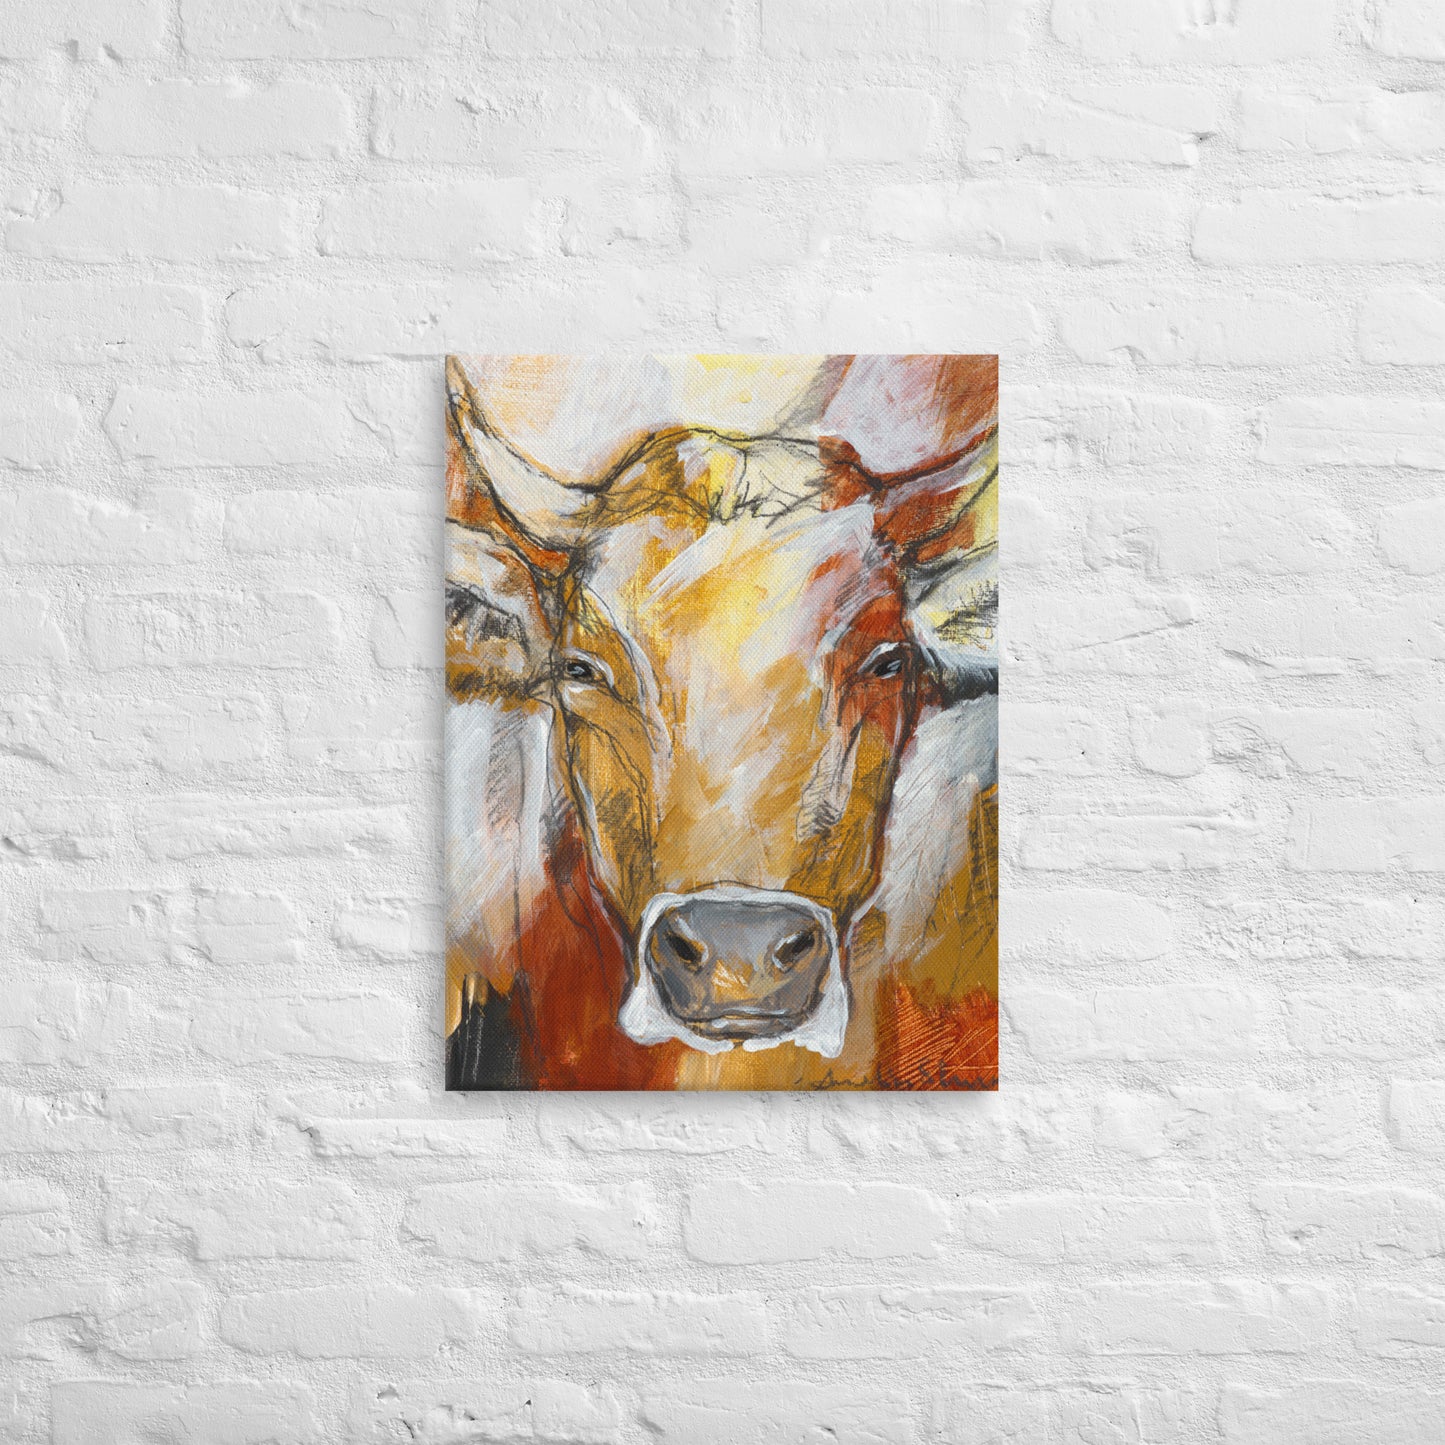 Animal canvas print - Innsbruck cow "Resi" in a frenzy of colour